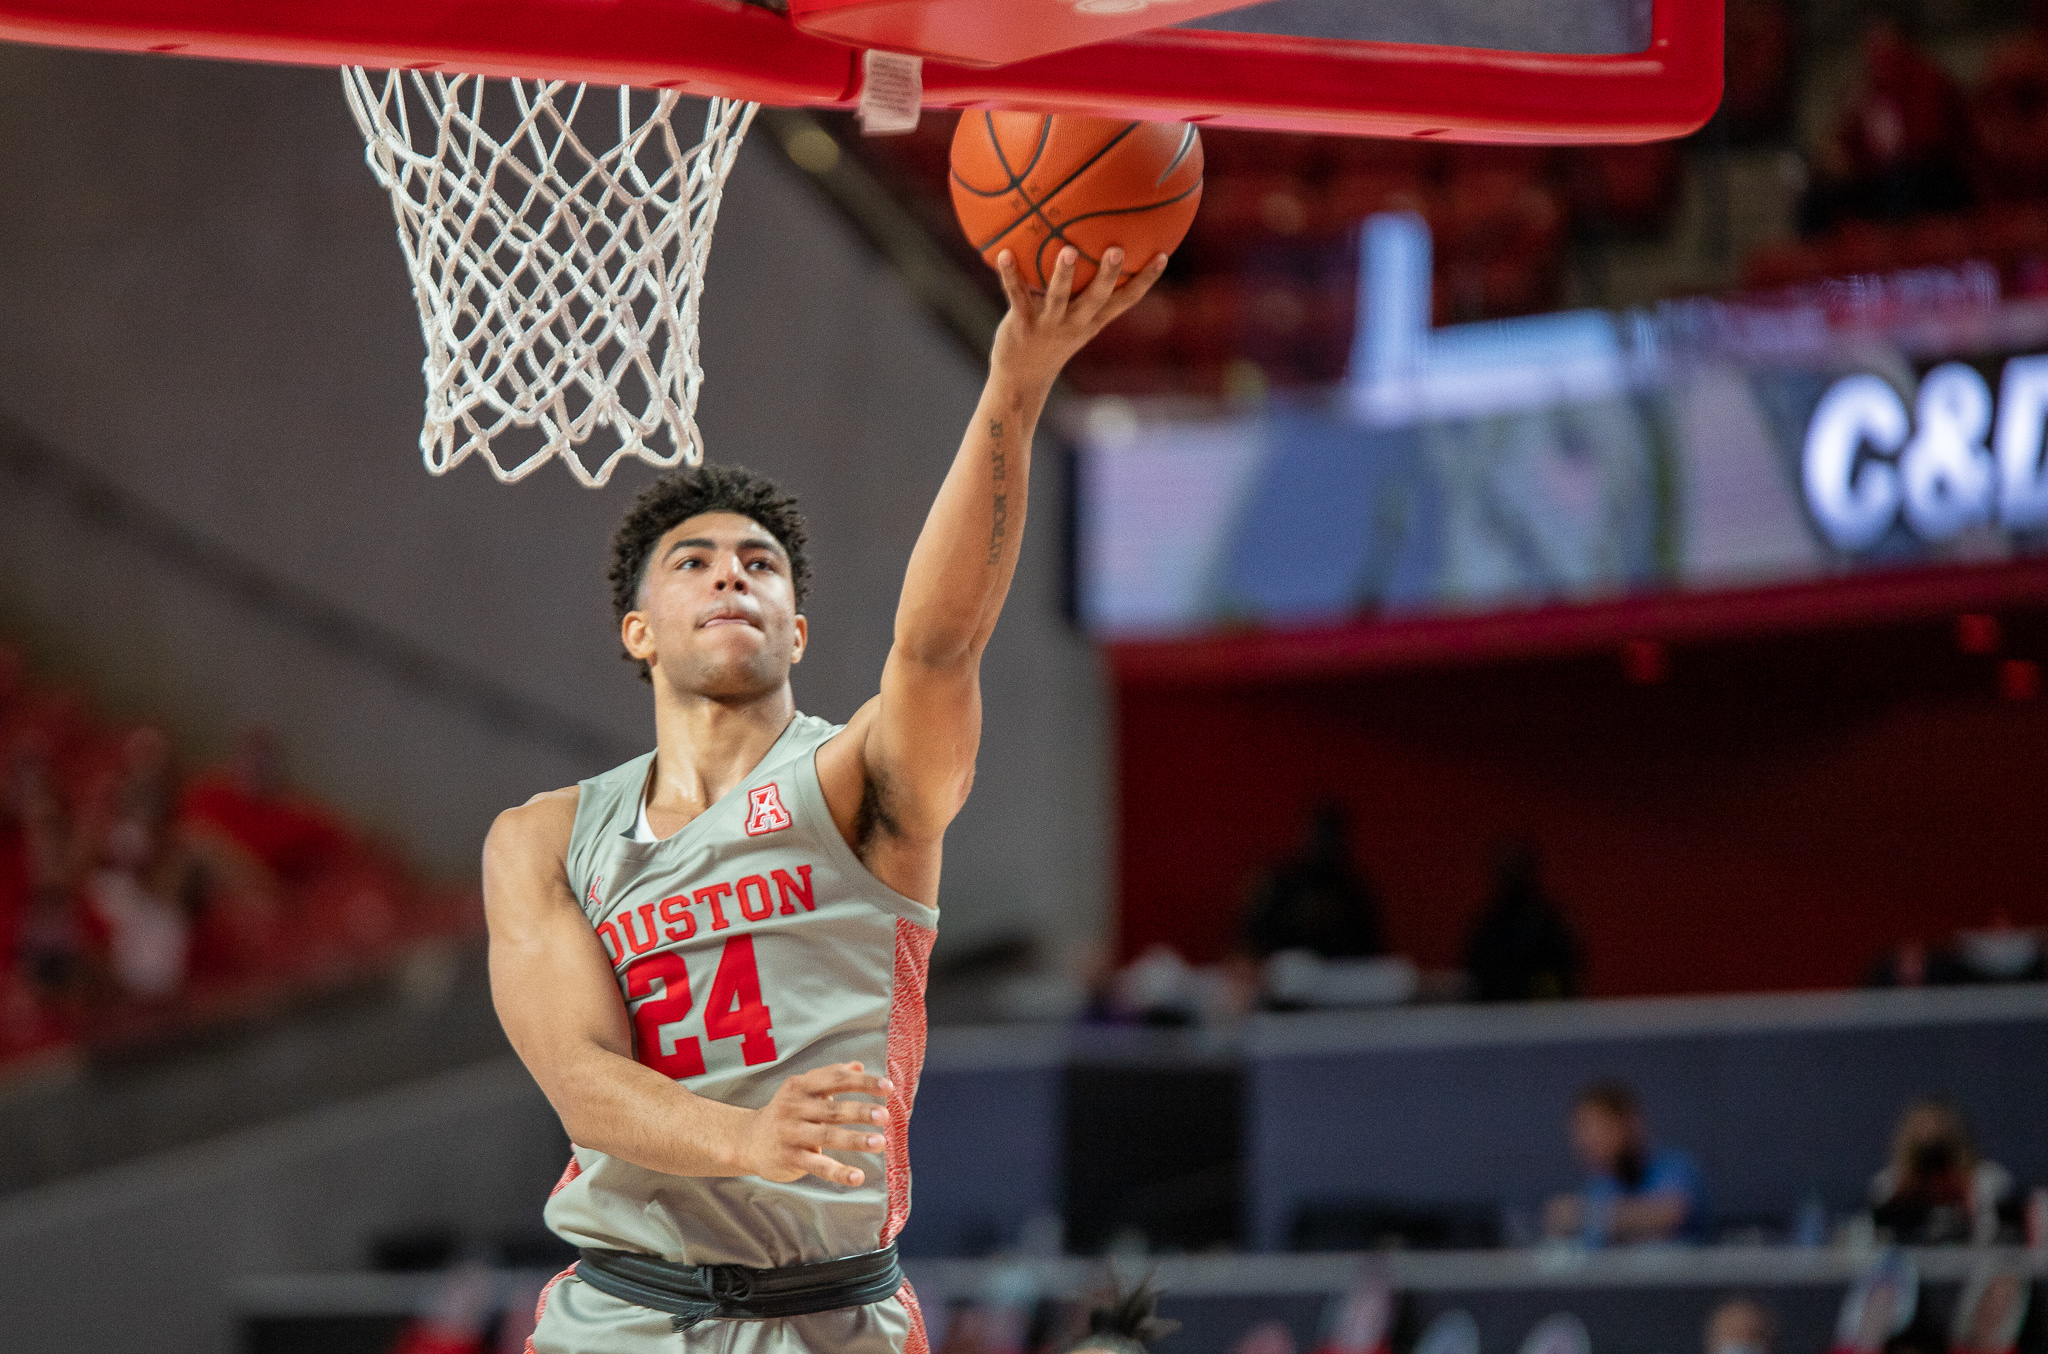 UH basketball guard Quentin Grimes scores a layup against Western Kentucky on Thursday night at Fertitta Center. | Andy Yanez/The Cougar